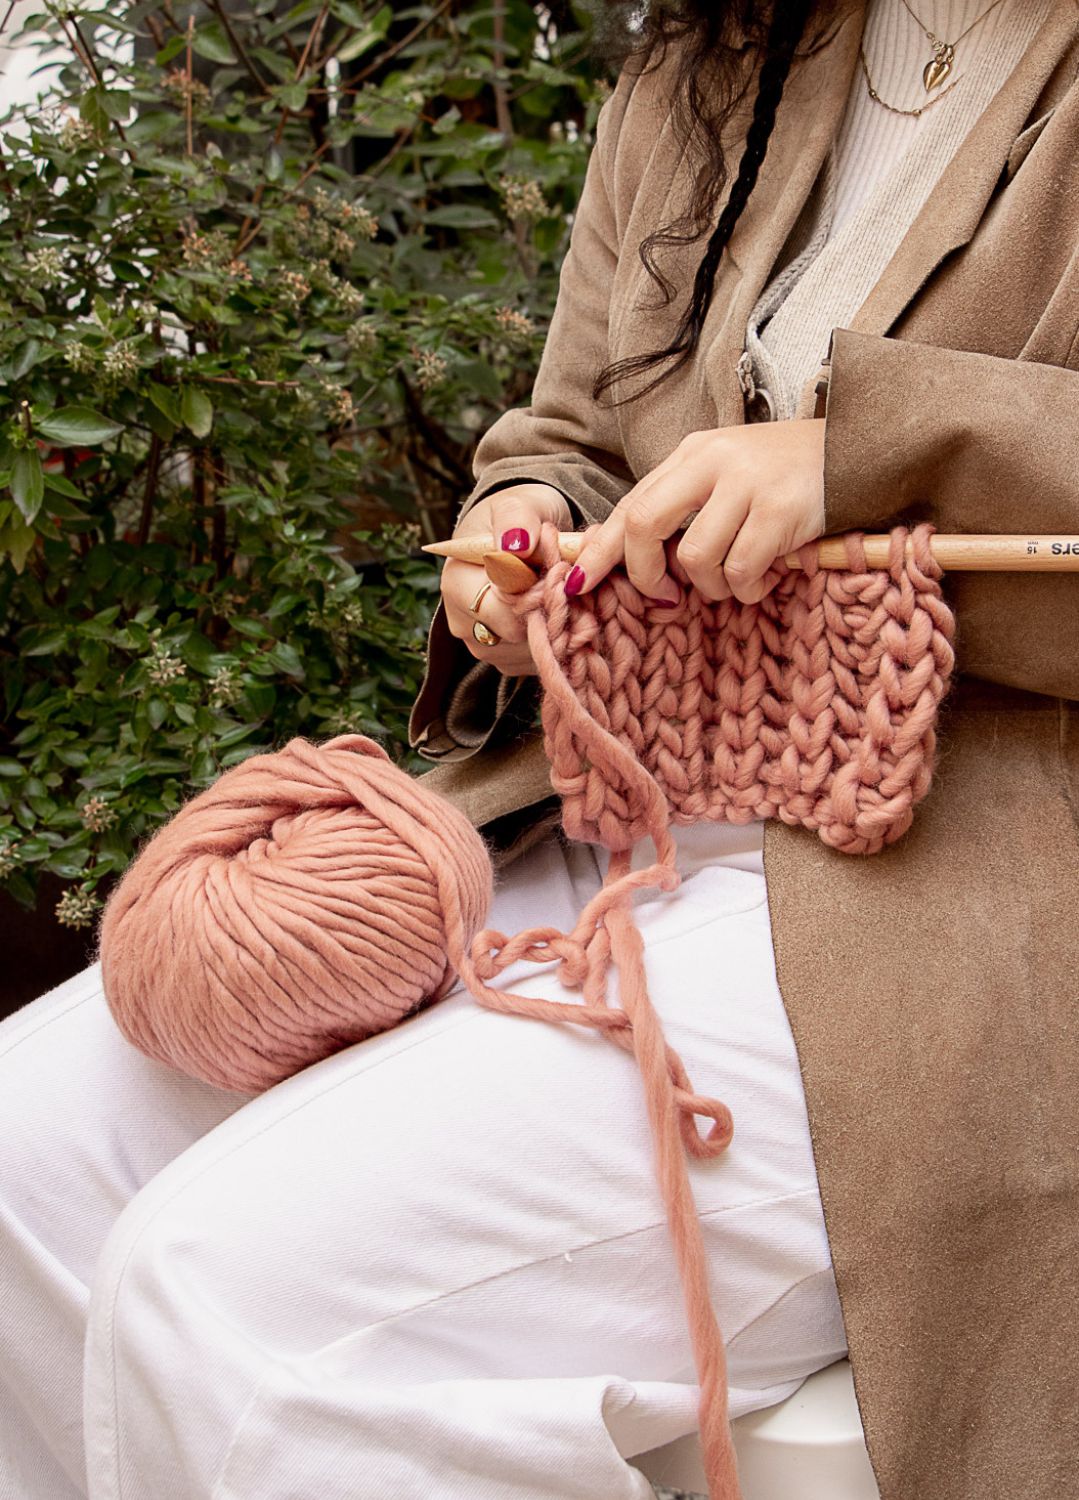 The Wool Dusty Pink – We are knitters